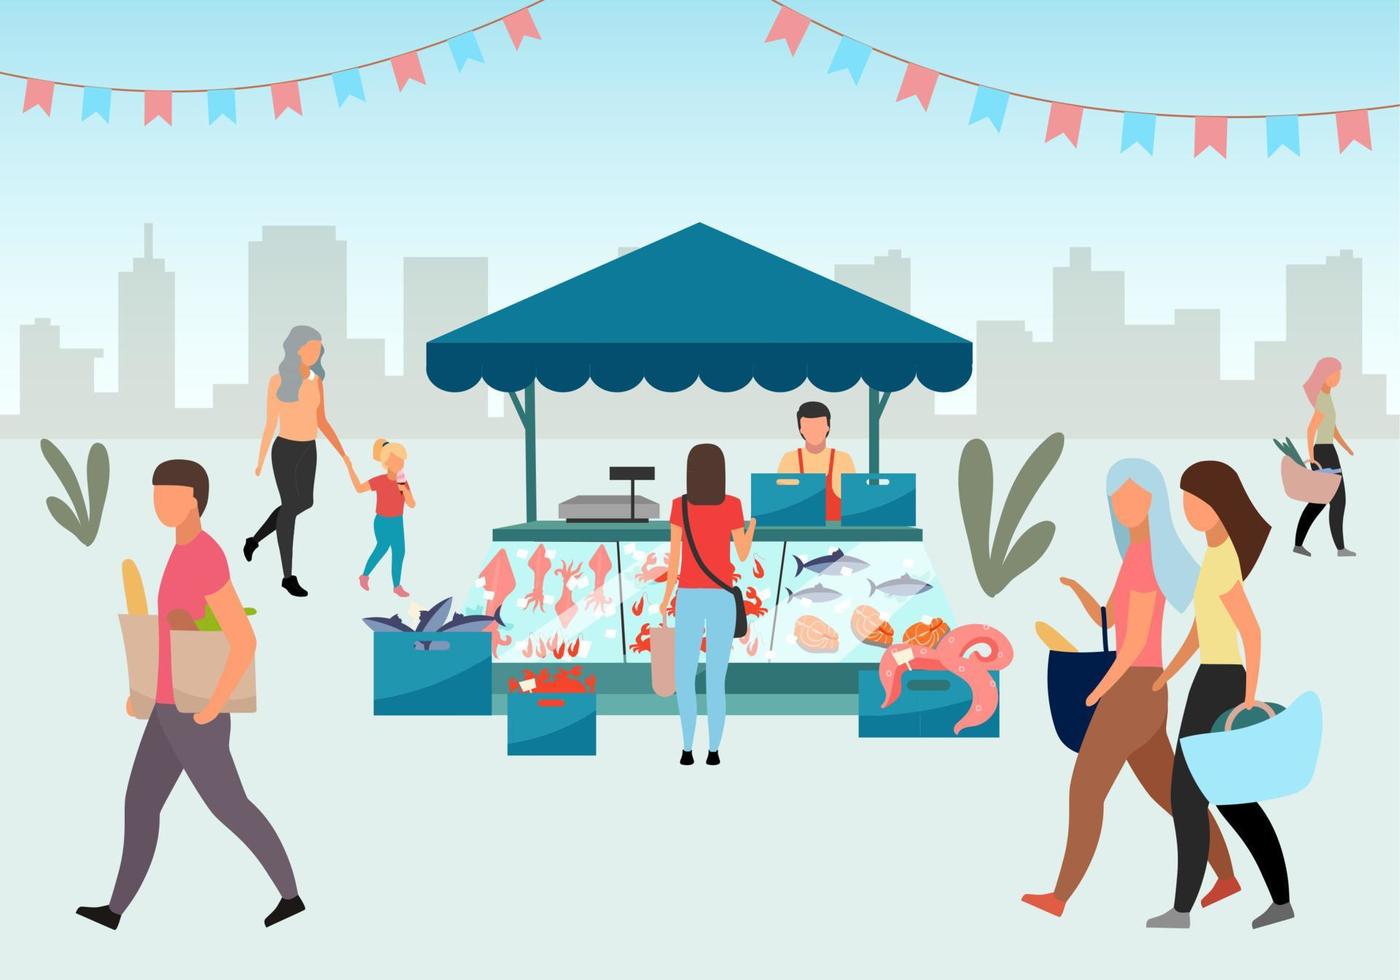 Street fishmarket flat illustration. People walk summer fair, outdoor market stall with seafood. Fresh sea food trade tent, fish counter. Customers with purchases in local shops cartoon characters vector